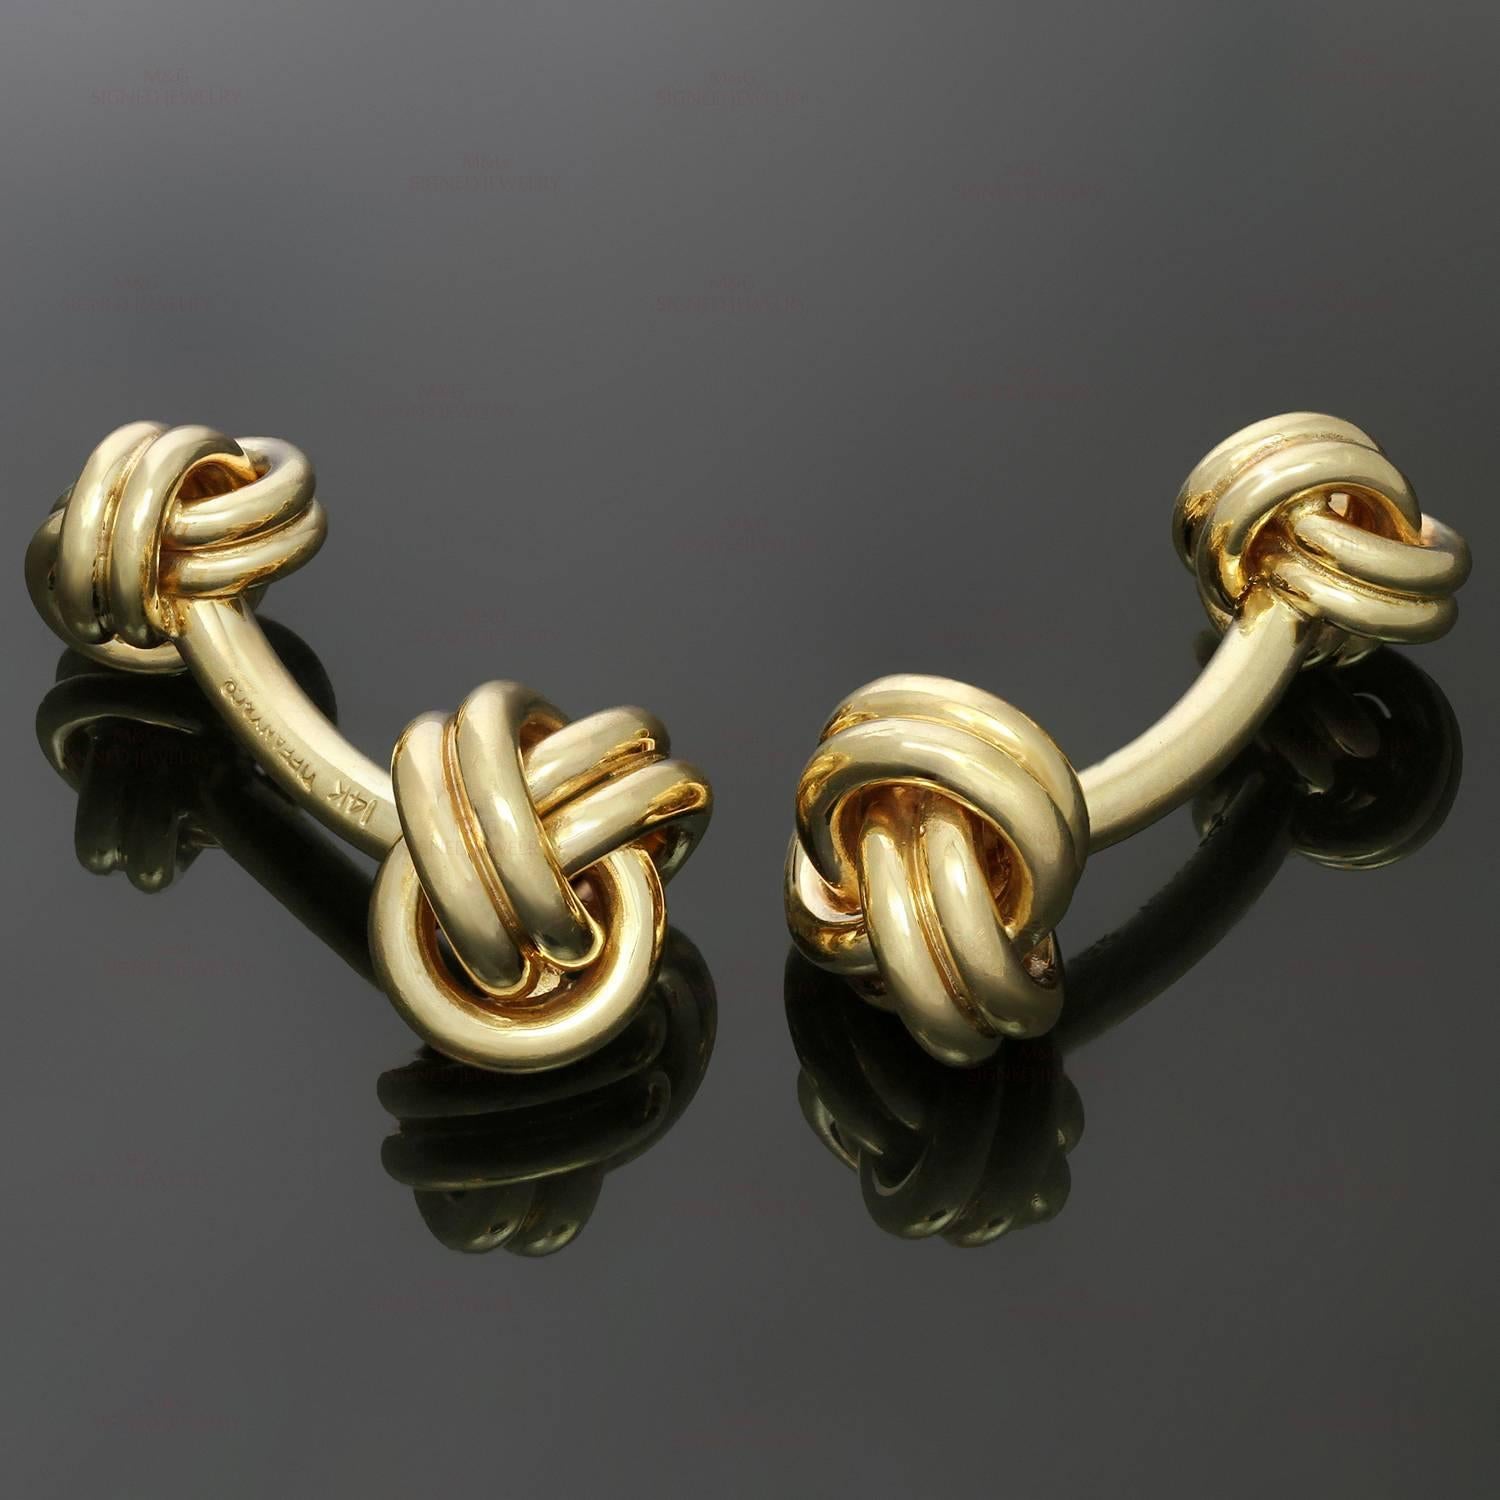 These classic Tiffany cufflinks feature the iconic Love Knot design crafted in 14k yellow gold. Made in United States circa 1990s. Measurements: 0.51" (13mm) width, 0.90" (23mm) length. 